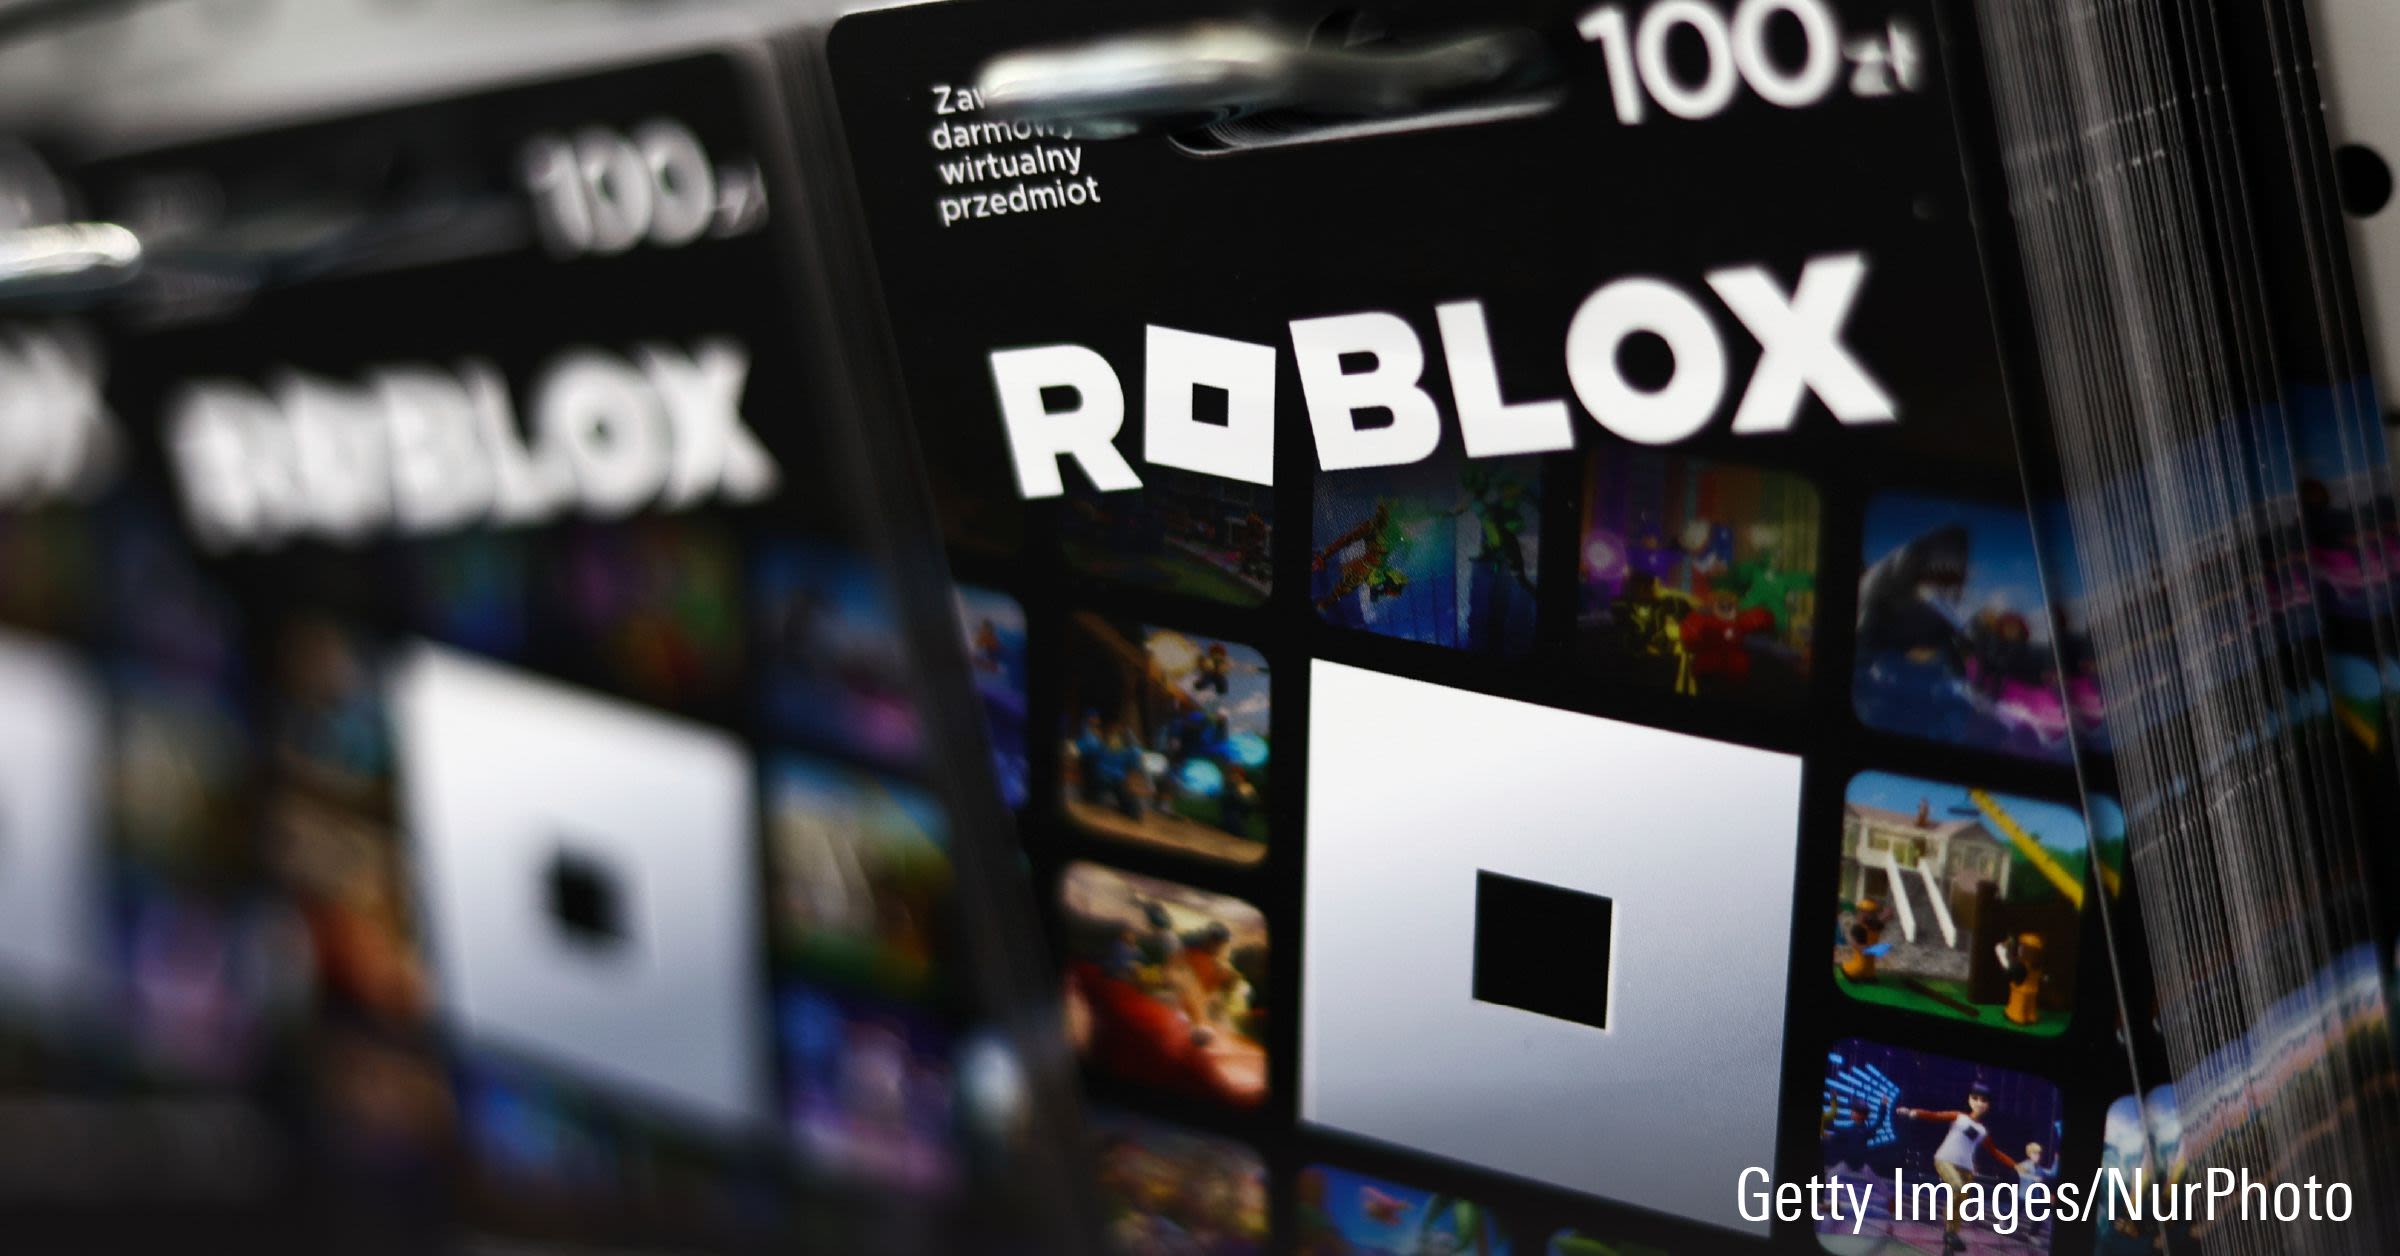 After Earnings, Is Roblox Stock a Buy, Sell, or Fairly Valued?